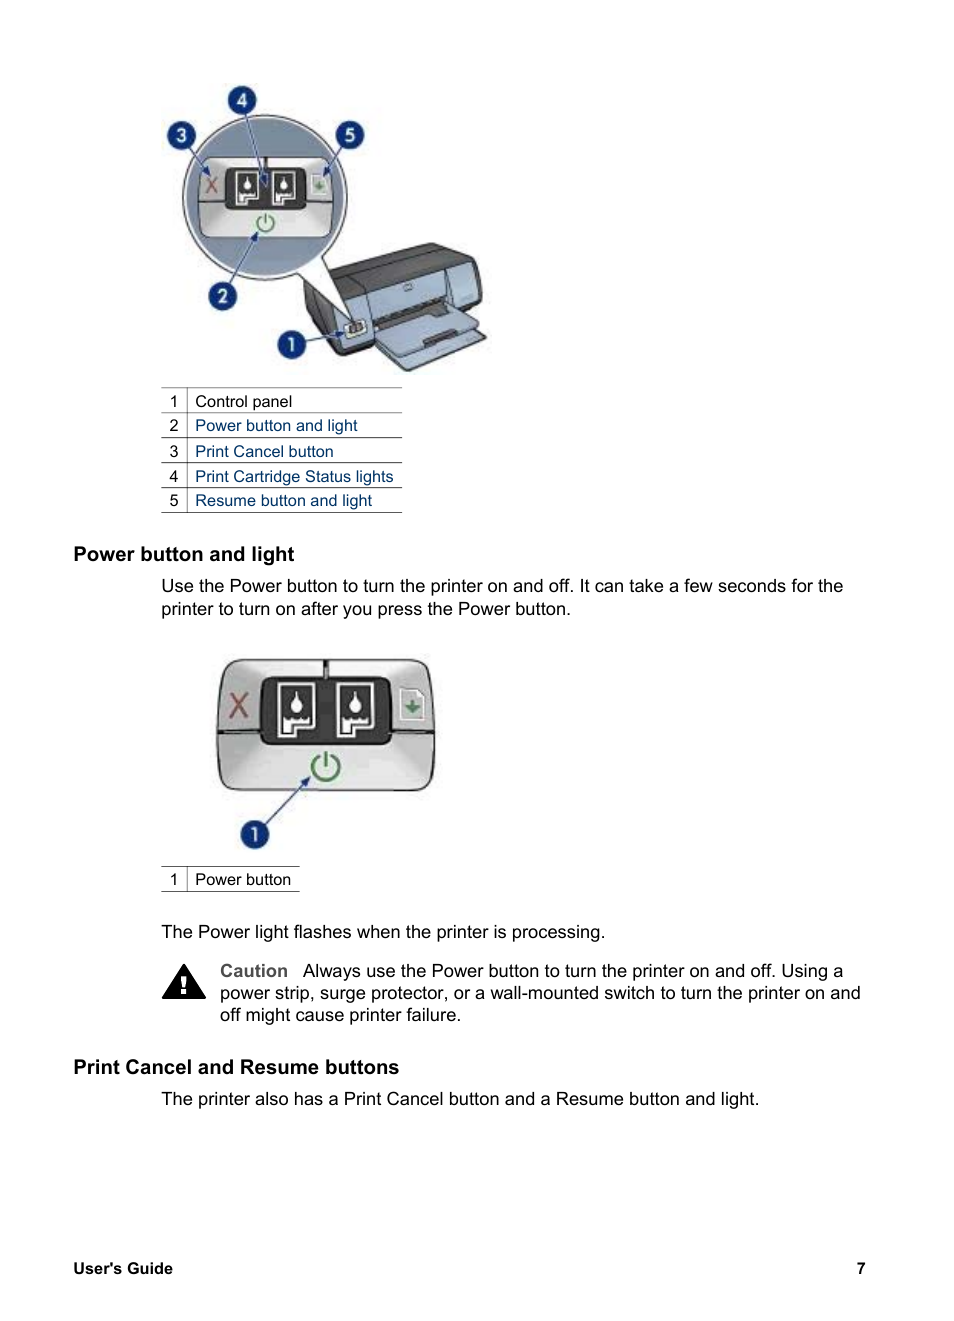 Power button and light, Print cancel and resume buttons | HP Deskjet